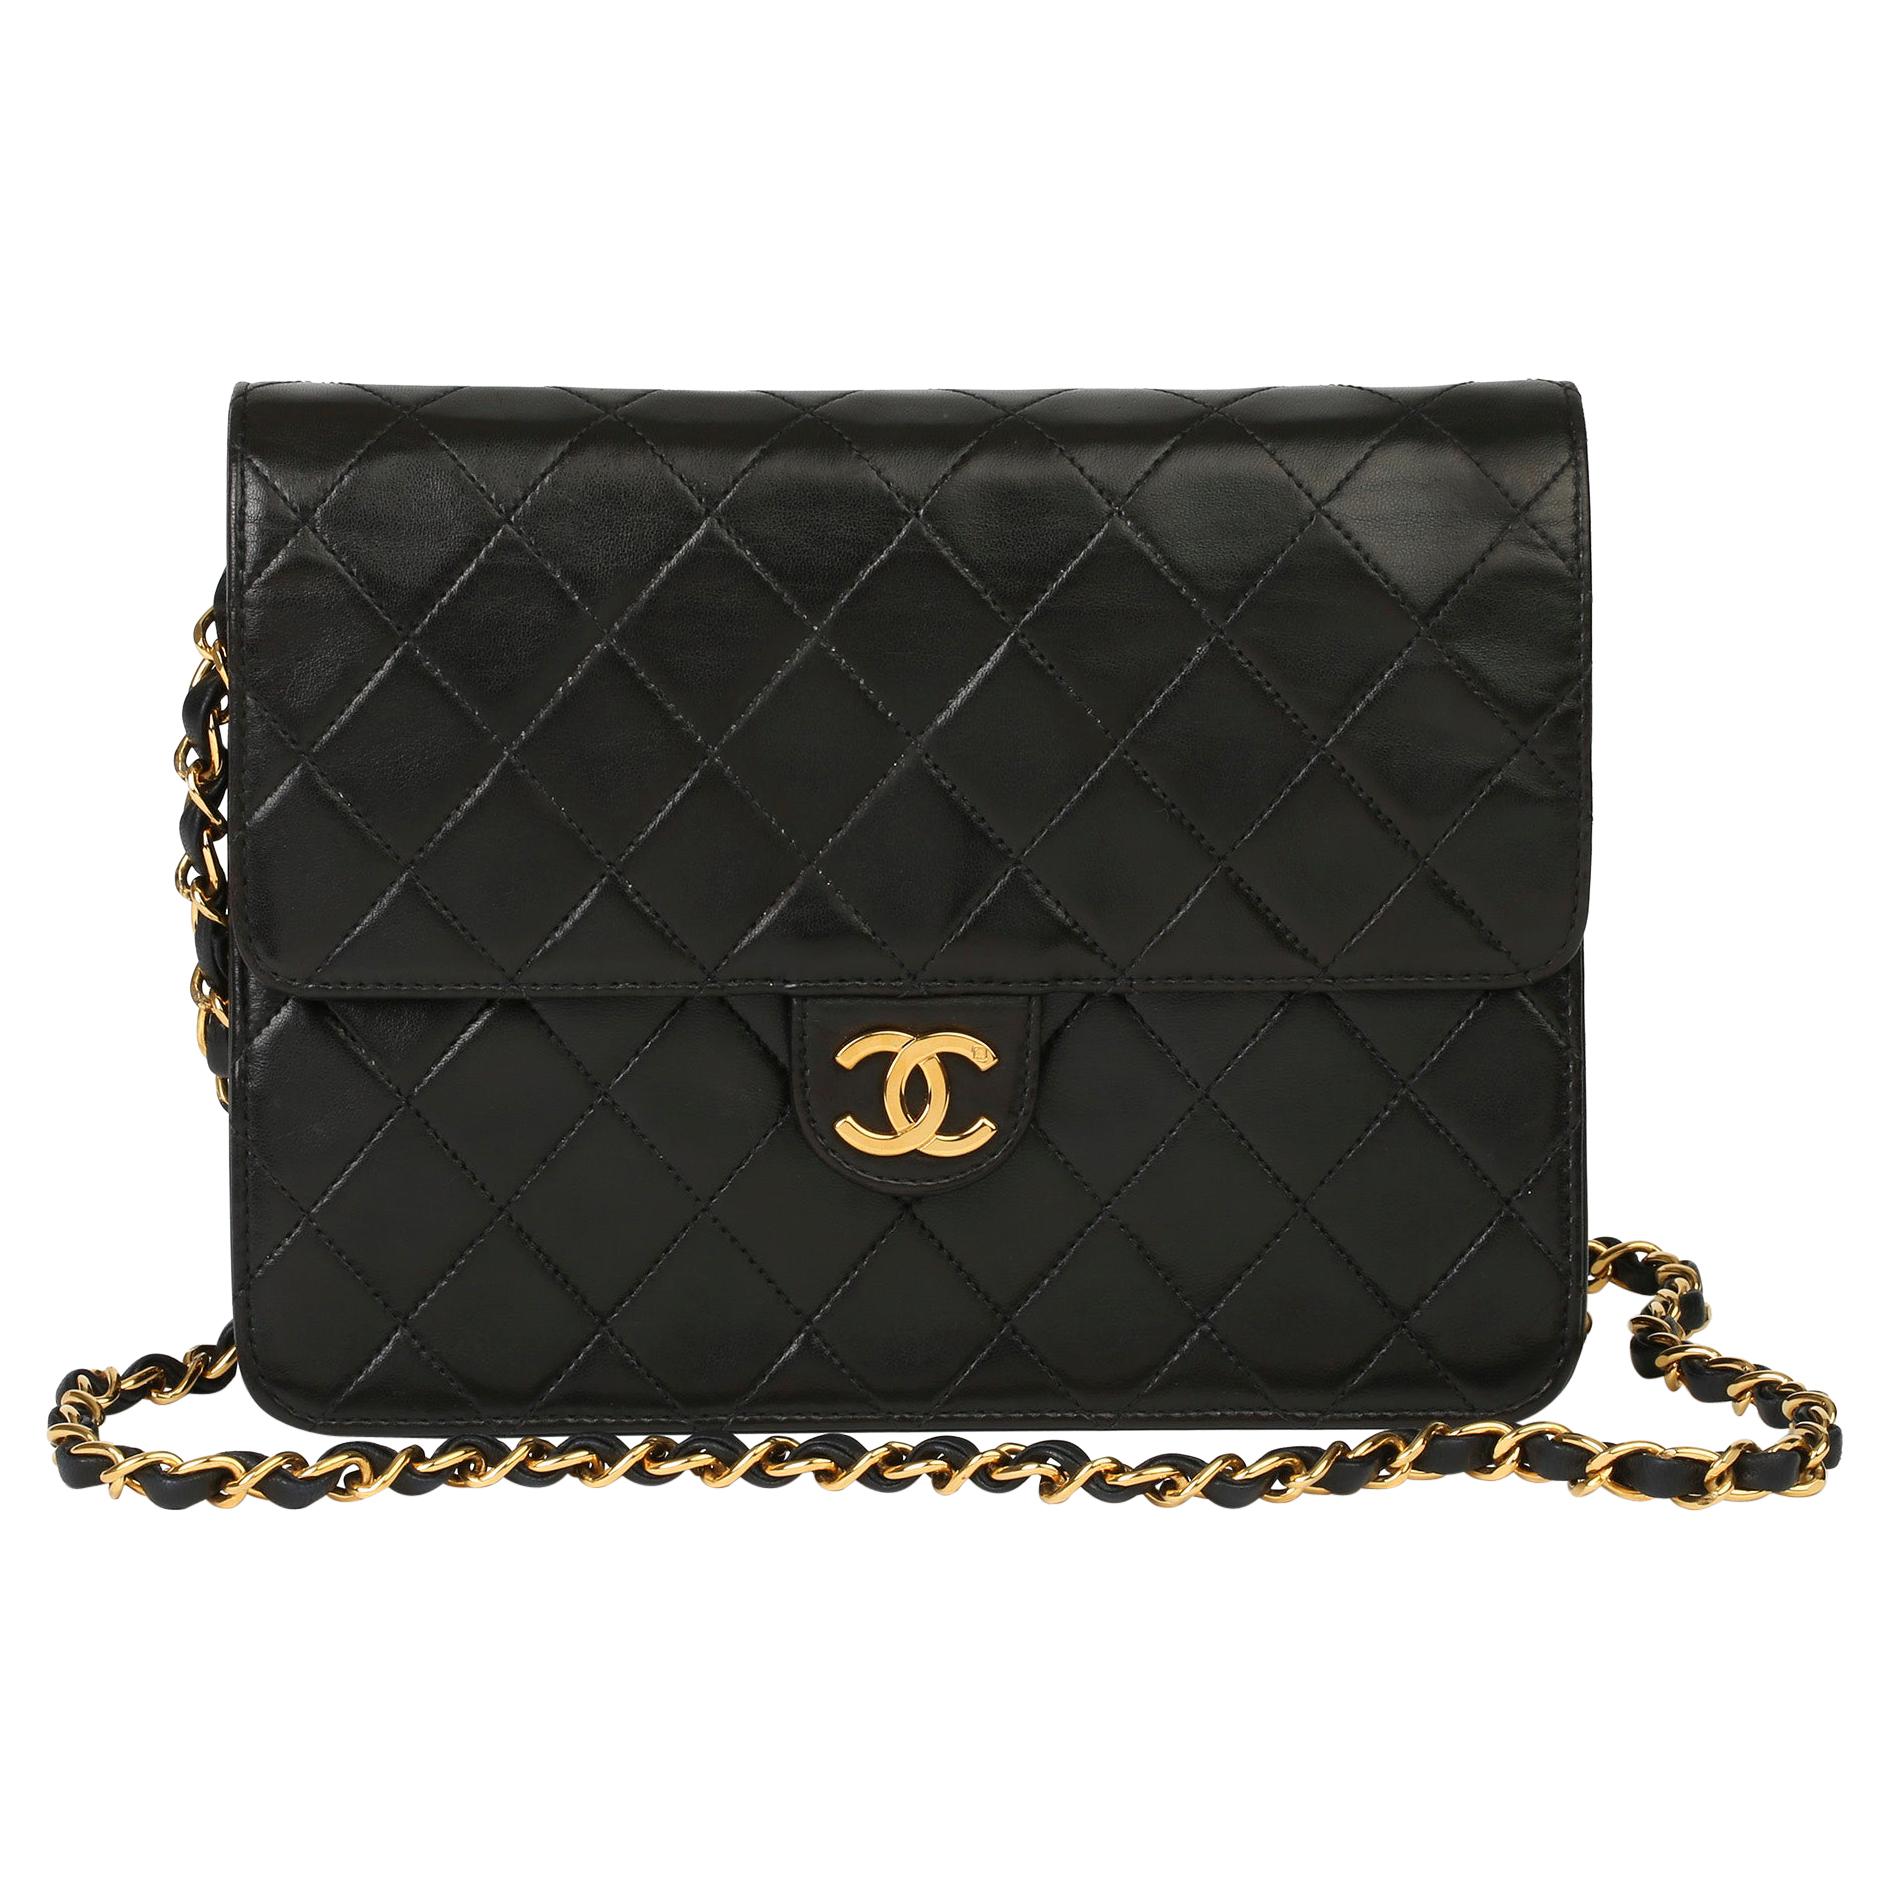 1996 Chanel Black Quilted Lambskin Vintage Small Classic Single Flap Bag